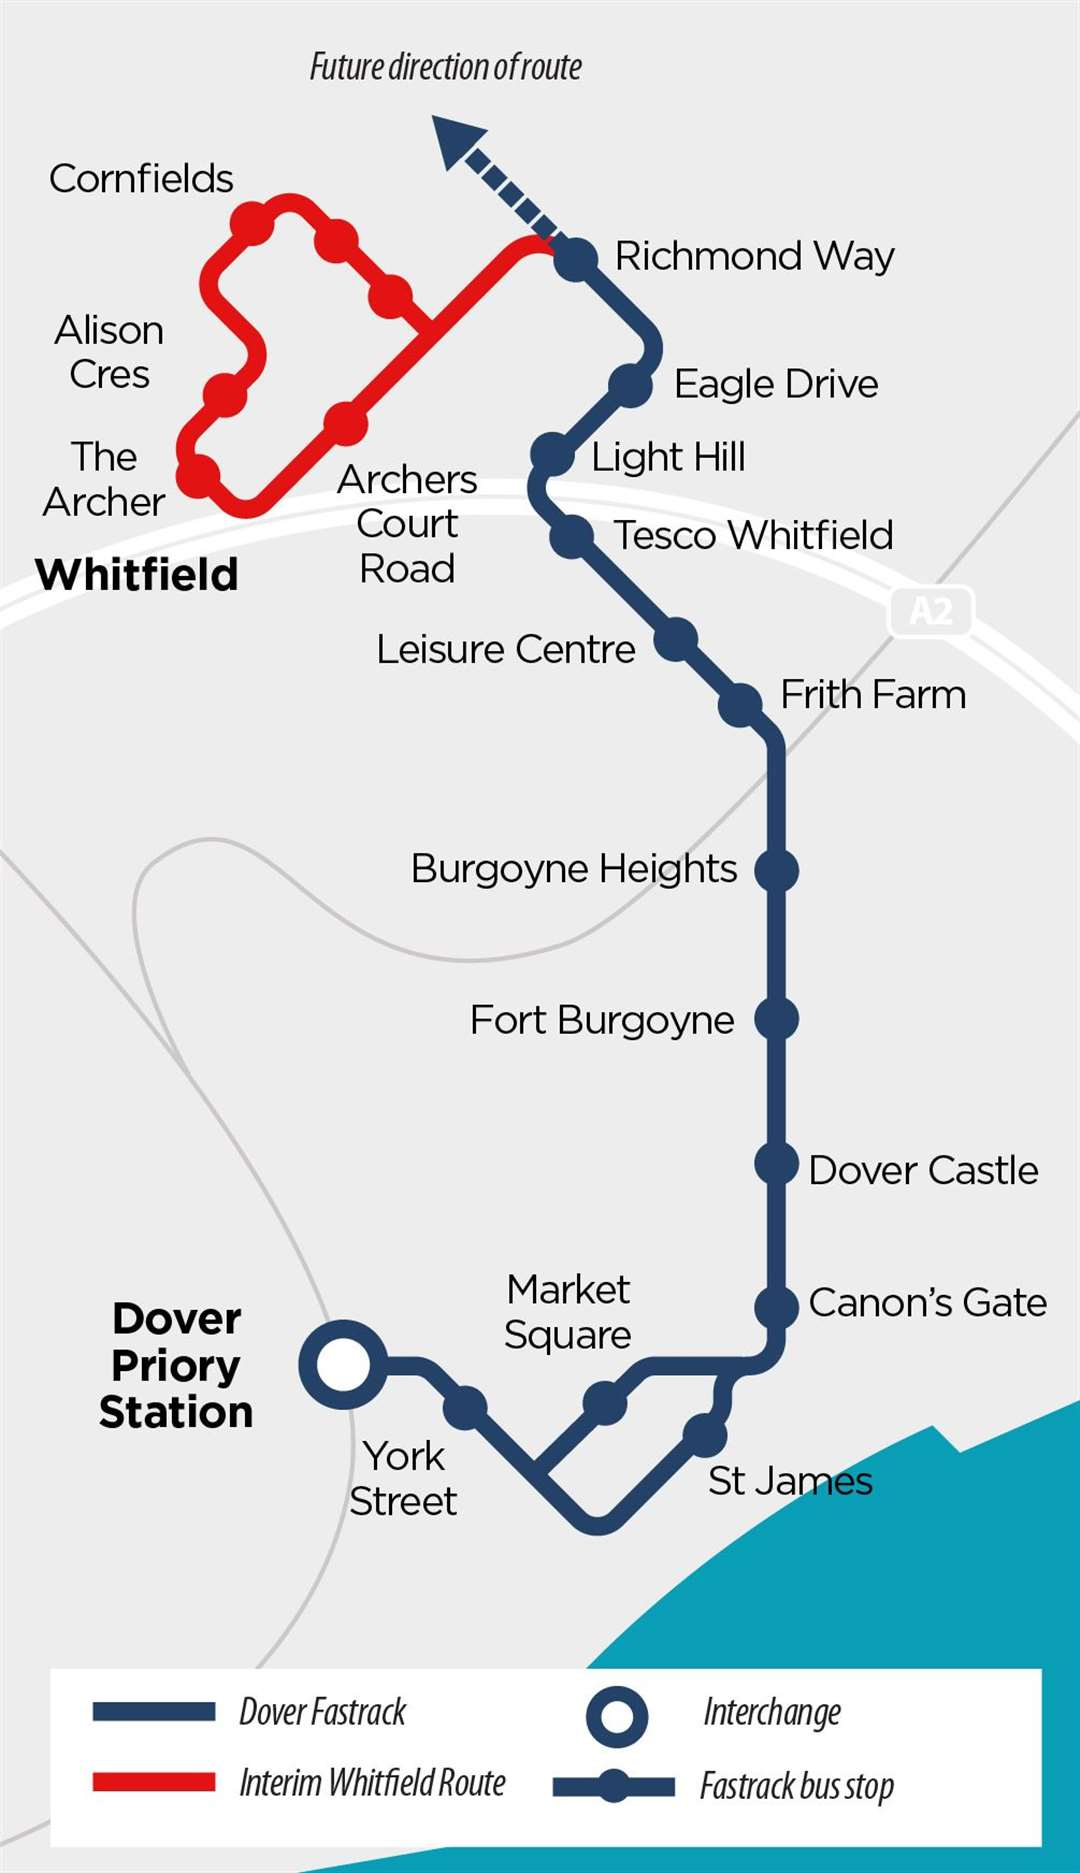 Images show Dover's Fastrack route taking shape